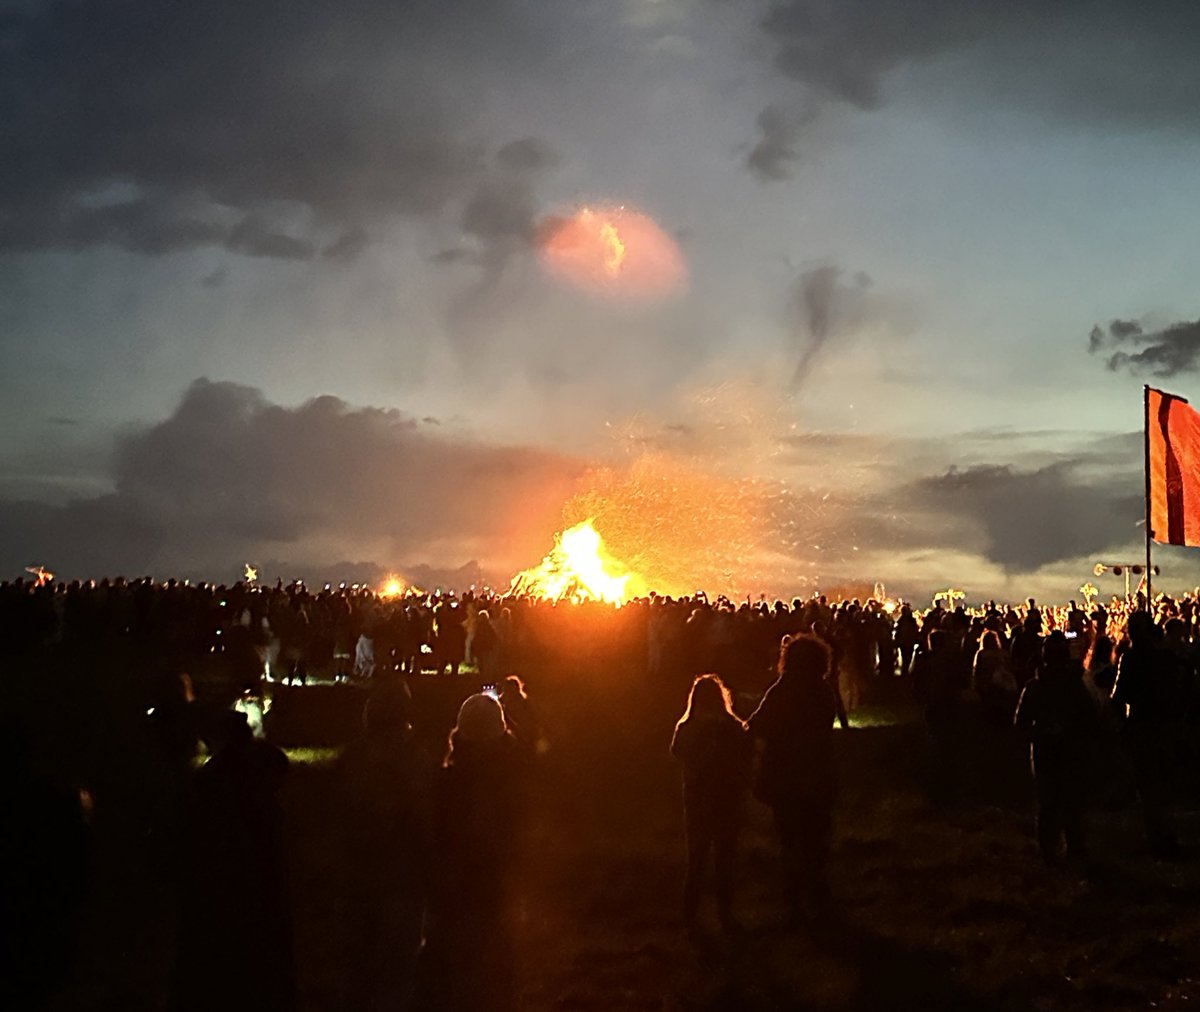 The Bealtaine Fire Festival at the Hill of Uisneach ushering in the light & warmth of Summer. #Uisneach #Eriú #Summer #Celticfestivals